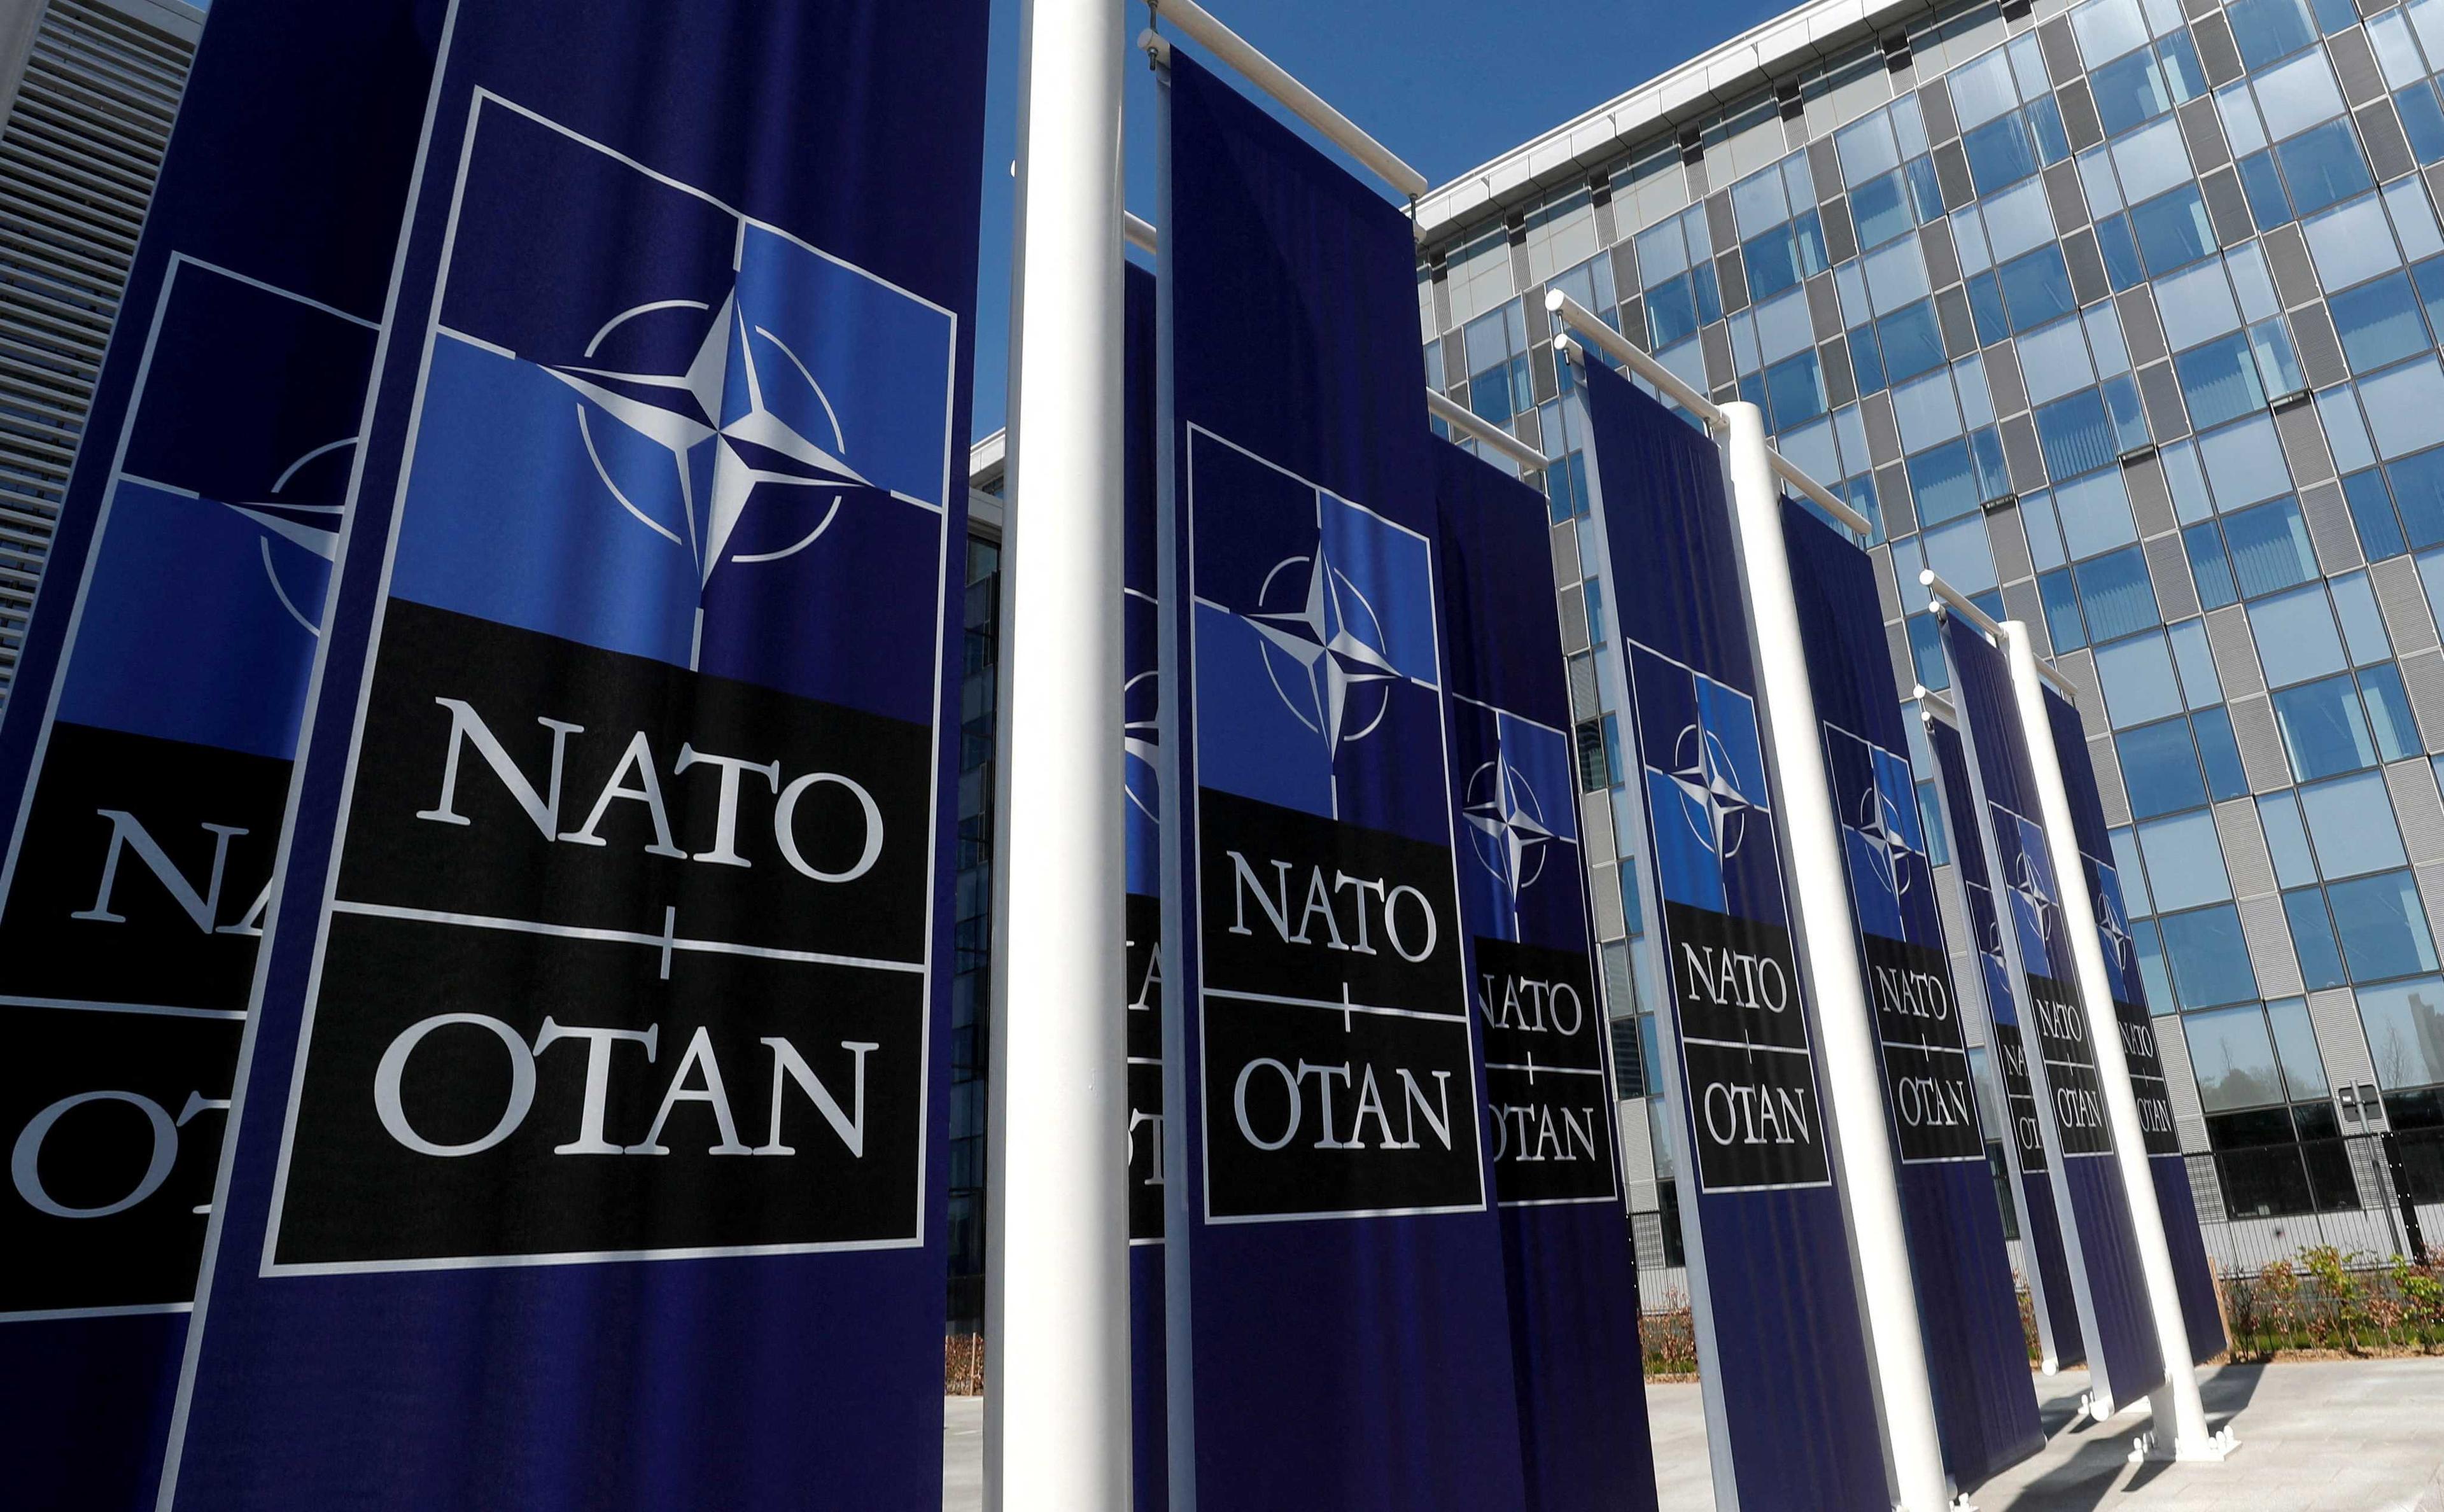 Banners displaying the Nato logo are placed at the entrance of new Nato headquarters during the move to the new building, in Brussels, Belgium April 19, 2018. Photo: Reuters